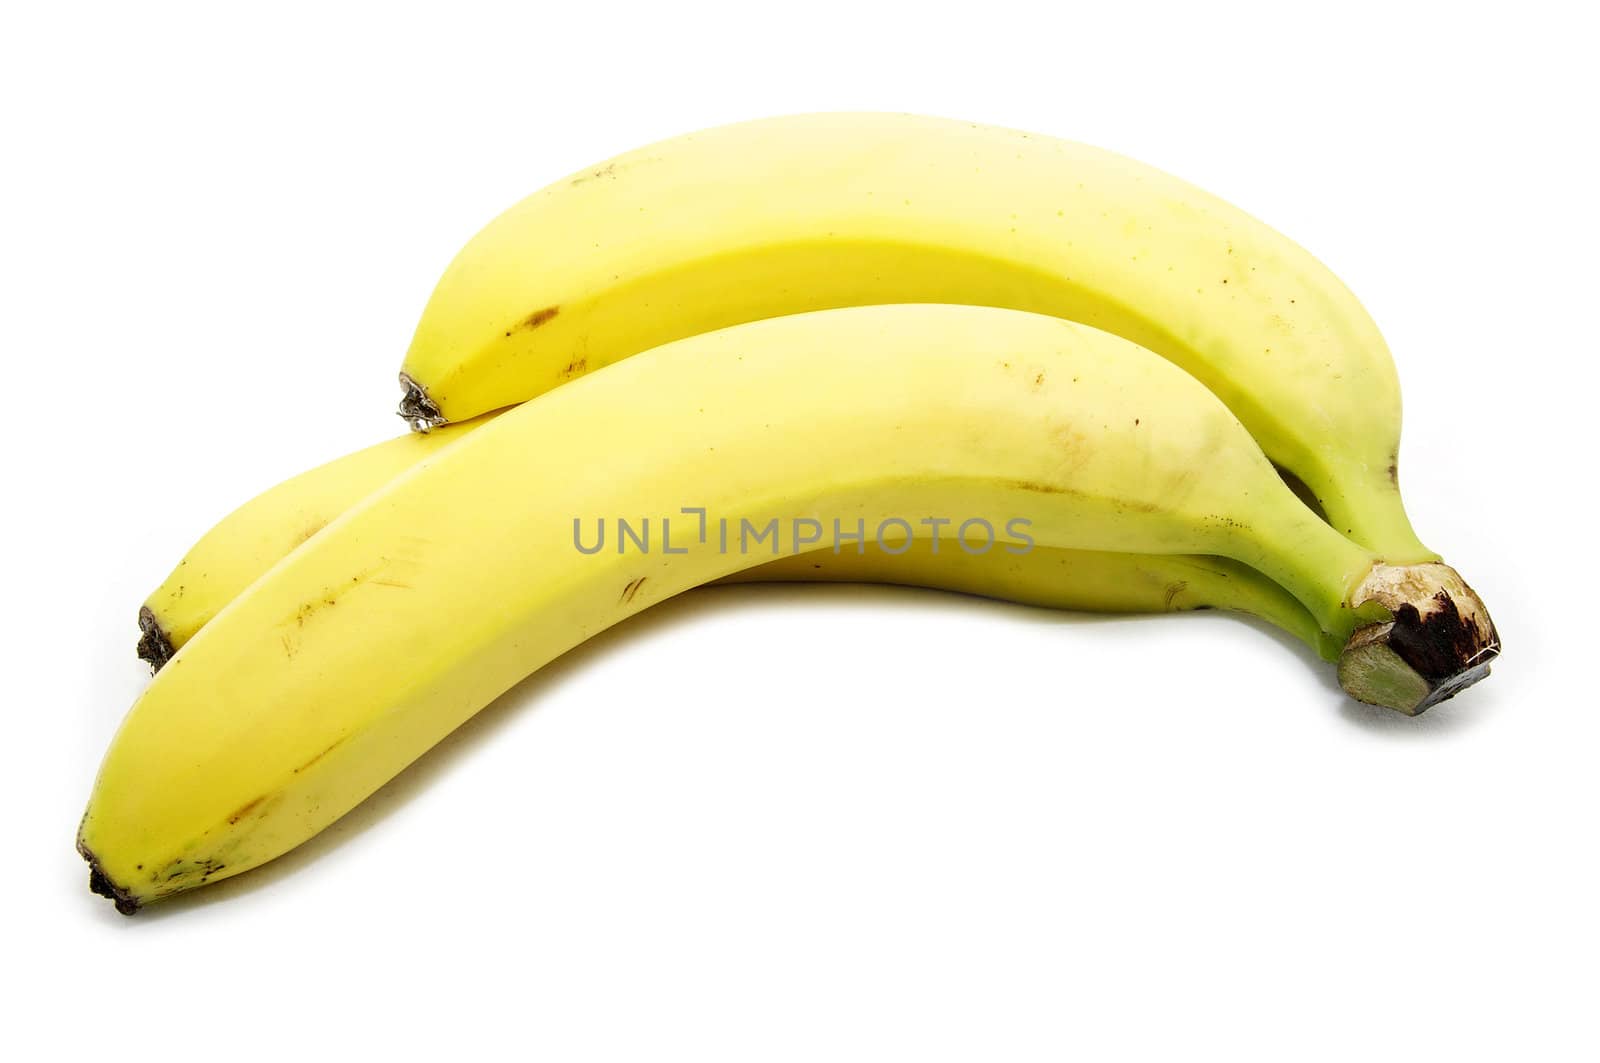 a branch of yellow bananas on white background